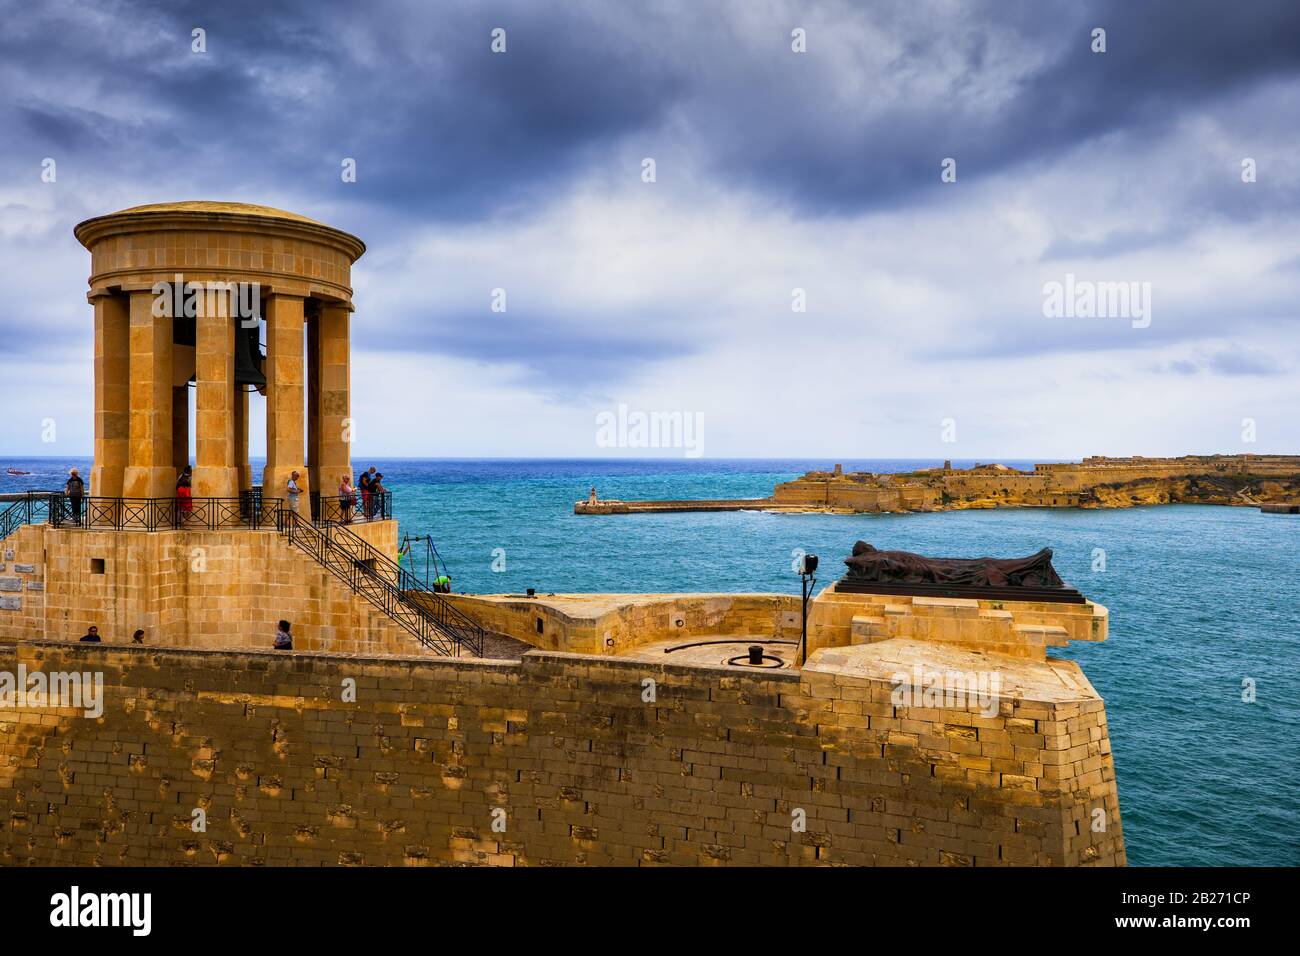 Siege Bell War Memorial in Valletta, Malta, monument to those who died during the siege of Malta in World War II Stock Photo